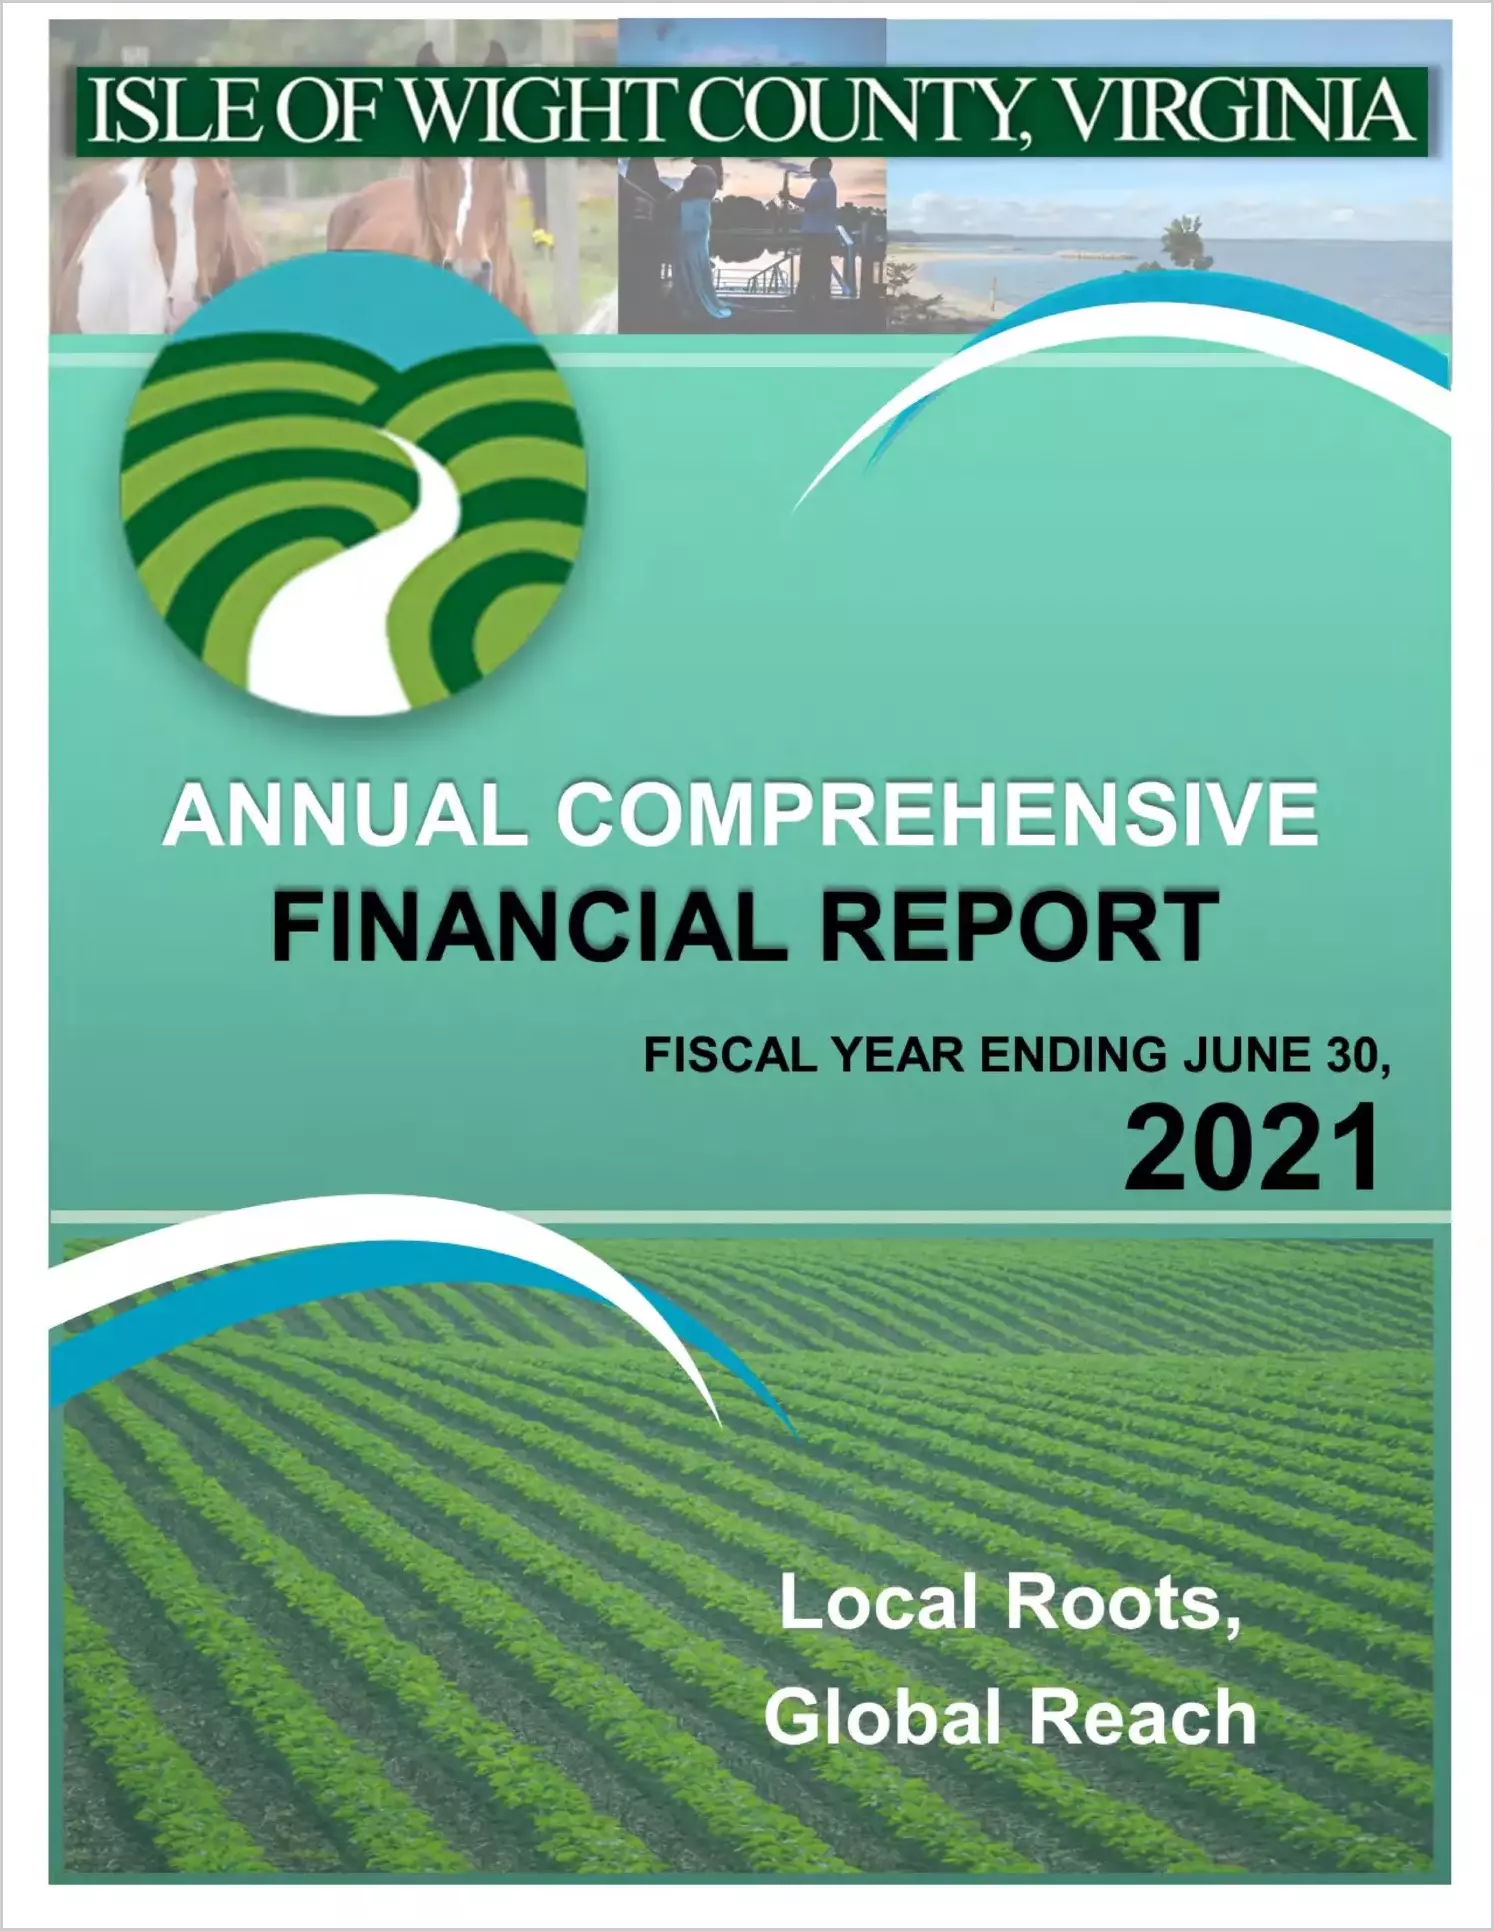 2021 Annual Financial Report for County of Isle of Wight